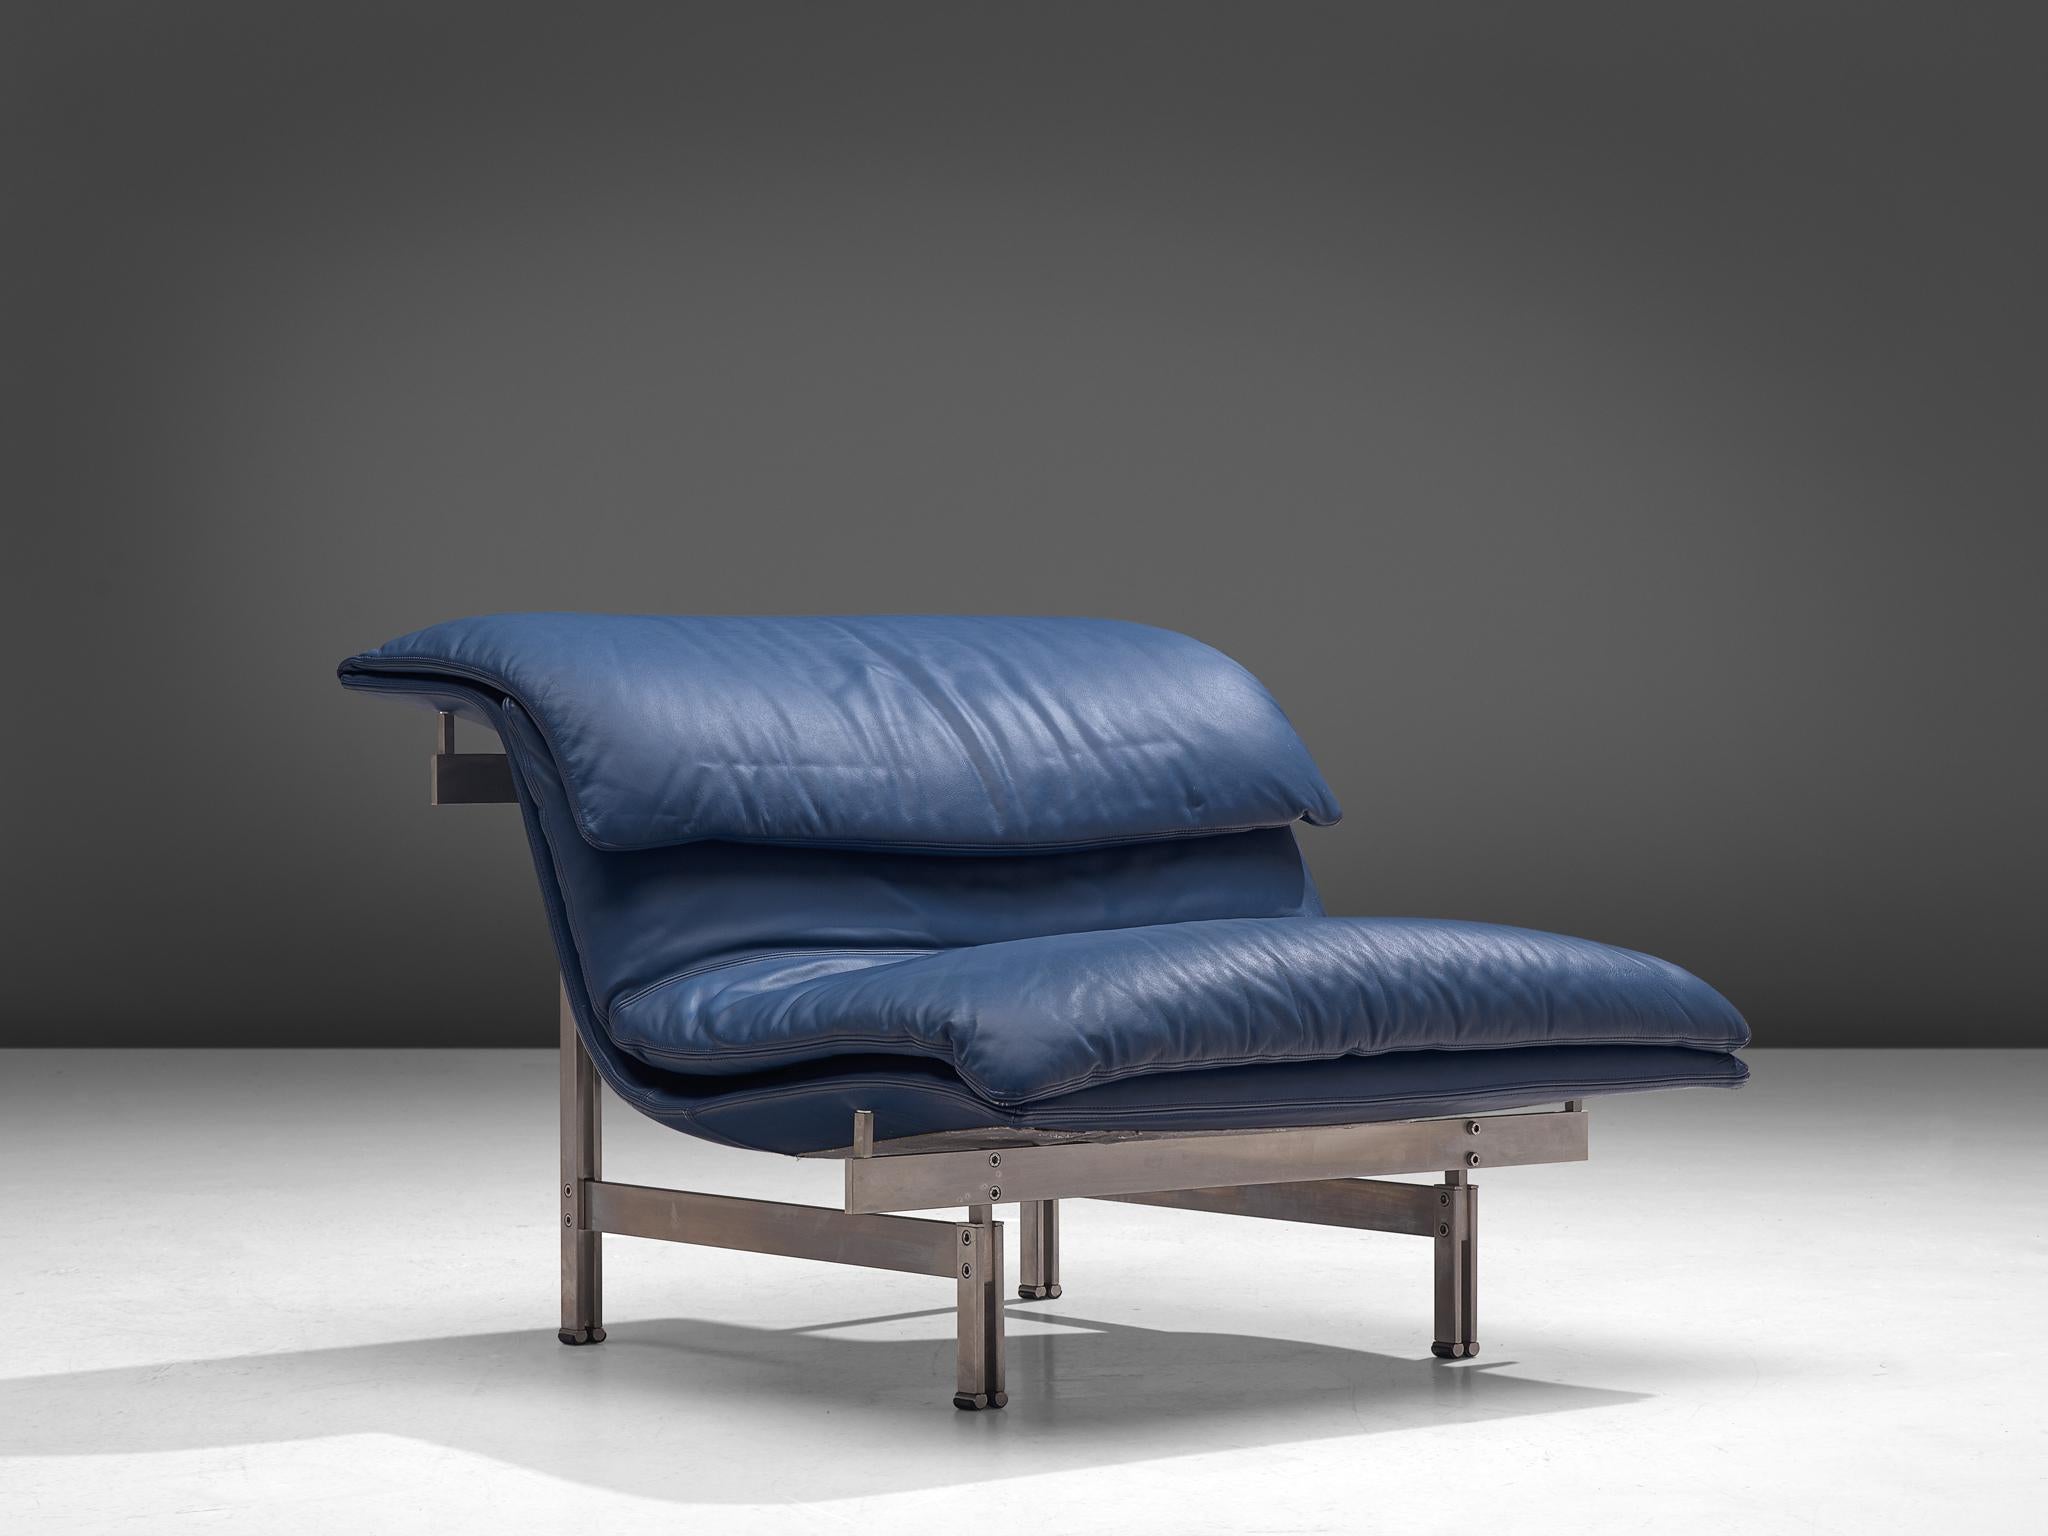 Giovanni Offredi for Saporiti, lounge chair, dark blue leather, steel frame, Italy, 1970s.

Thi iconic wave lounge chair is designed by Giovanni Offredi in postwar Italy. The design for this easy chair is dynamic, sculptural and figurative. The